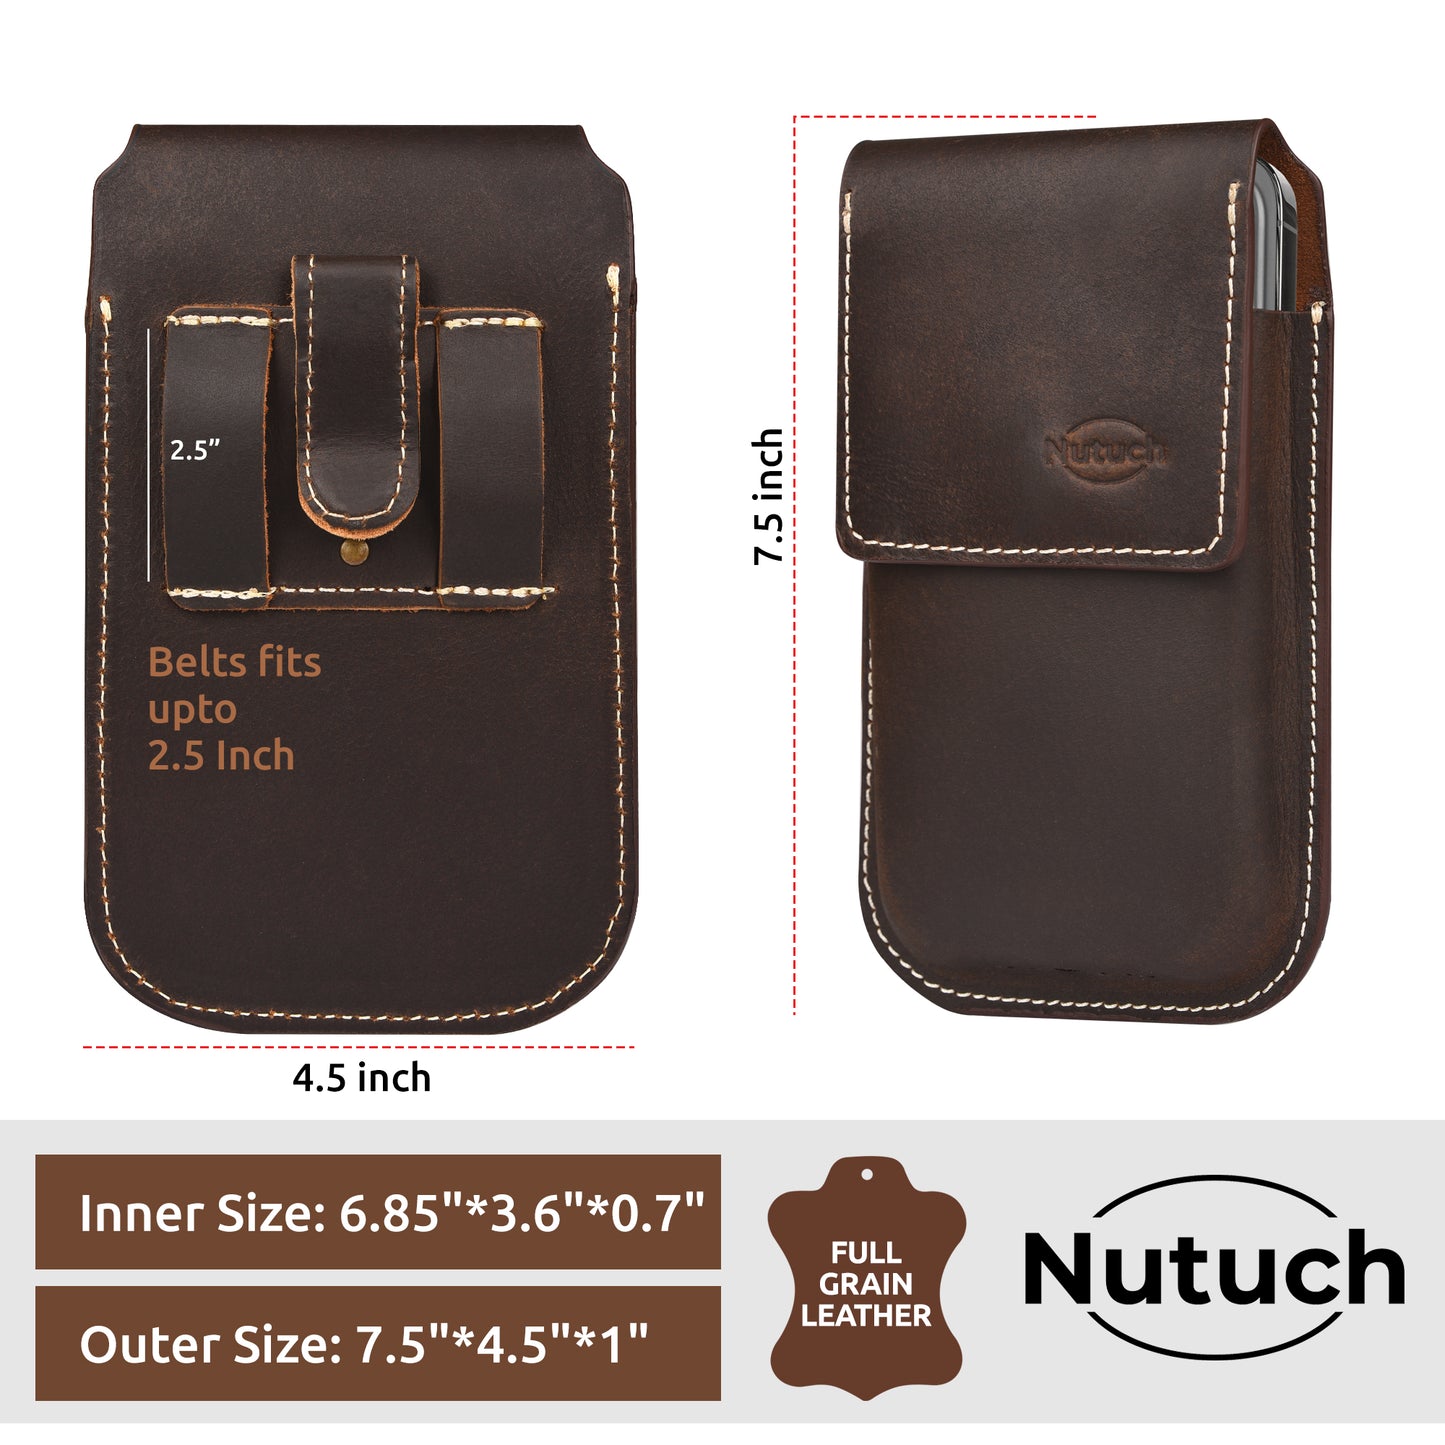 NUTUCH Genuine Leather Phone Holster with Belt Clip | Cell Phone Case for iPhone and Smartphone | Cell Phone Holders | NT-501-CP